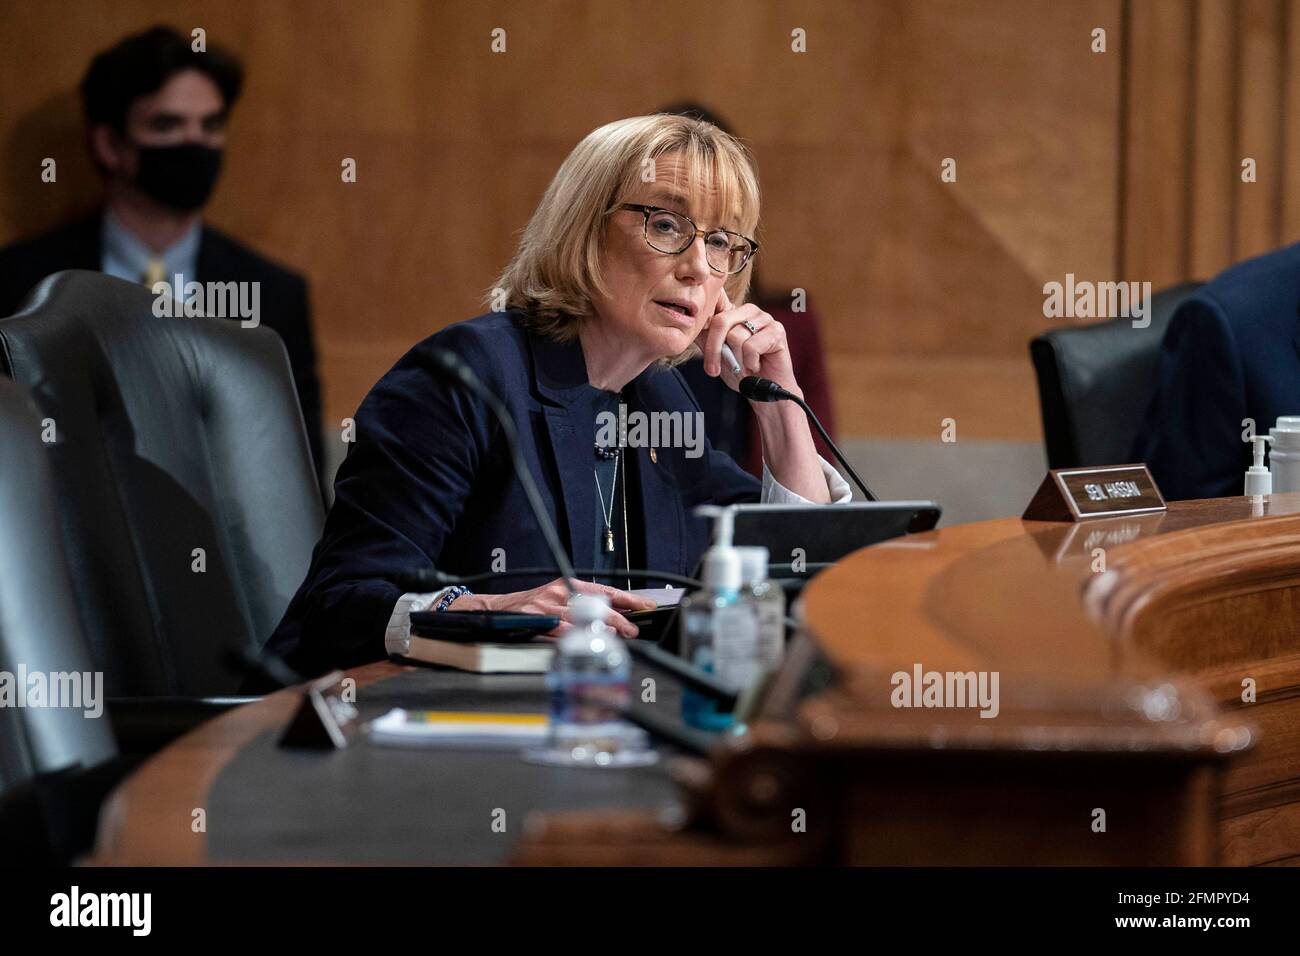 Washington, USA. 11th May, 2021. Senator Maggie Hassan, a Democrat from New Hampshire, questions witnesses during a Senate Homeland Security and Governmental Affairs Committee hearing in Washington, DC, U.S., on Tuesday, May 11, 2021. The hearing is titled 'Prevention, Response, and Recovery: Improving Federal Cybersecurity Post-SolarWinds.' Photo by Sarah Silbiger/Pool/Sipa USA) Credit: Sipa USA/Alamy Live News Stock Photo